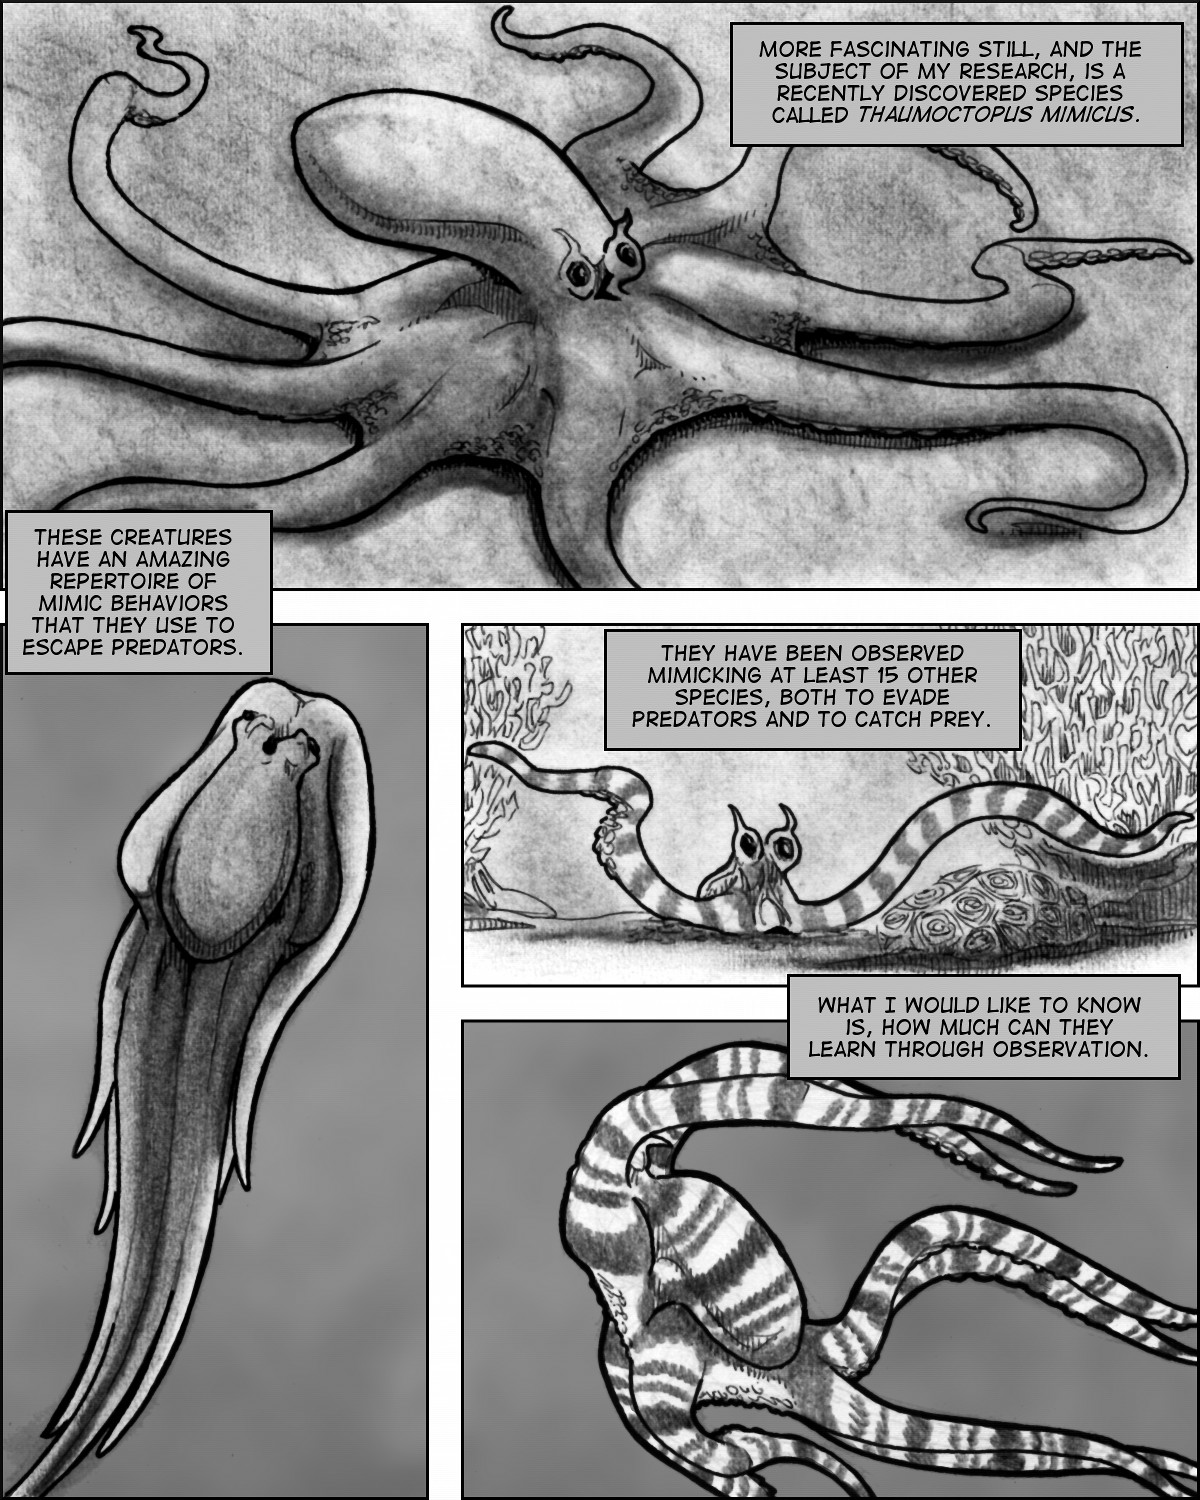 The amazing mimetic abilities of Thaumoctopus mimicus